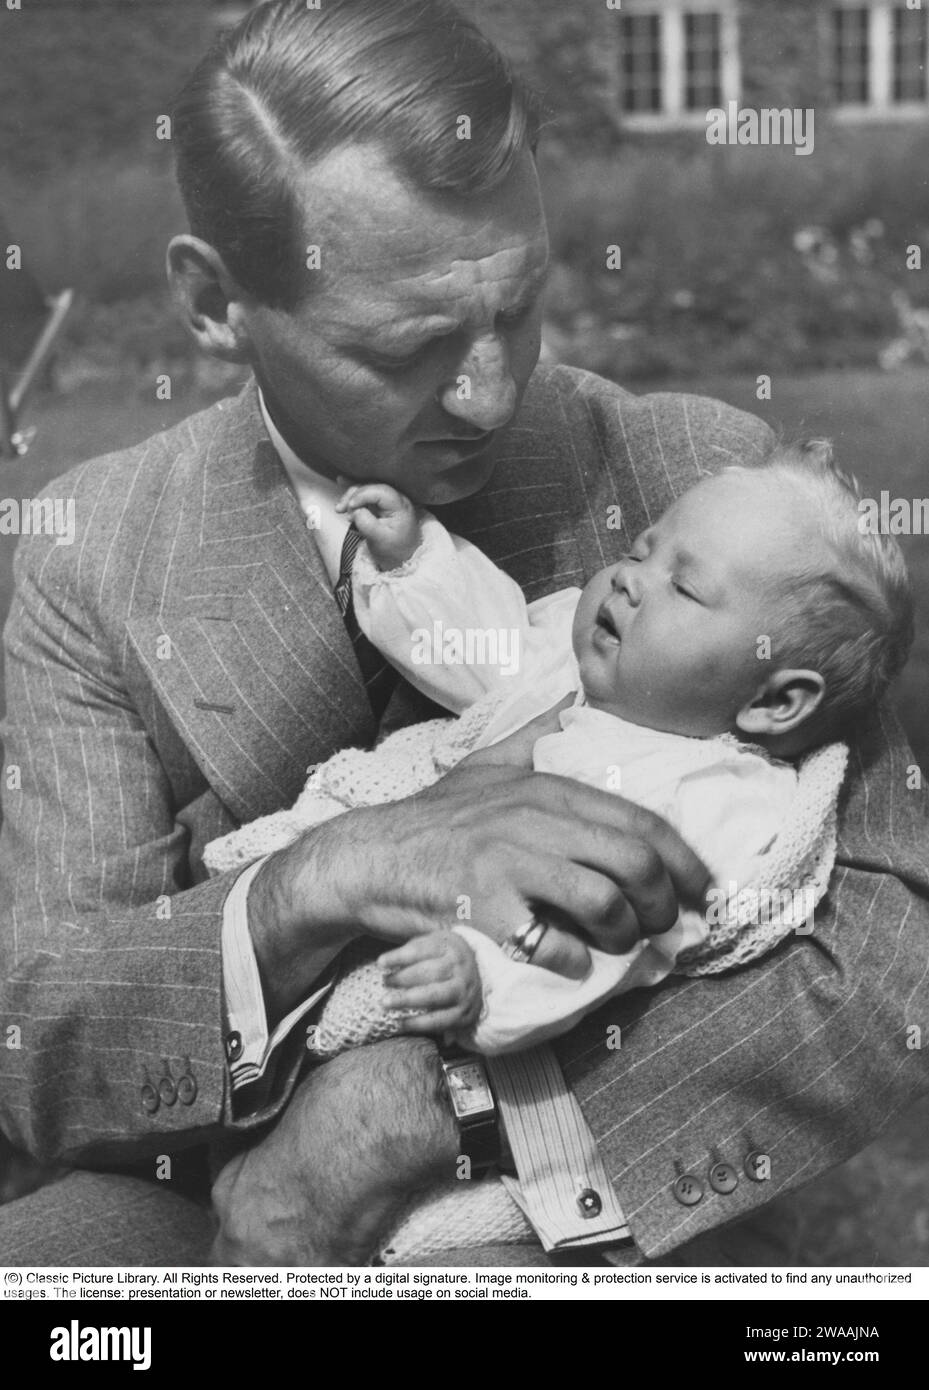 Queen Margrethe II of Denmark. Pictured in the arms of her father king Frederick IX august 1940. Stock Photo